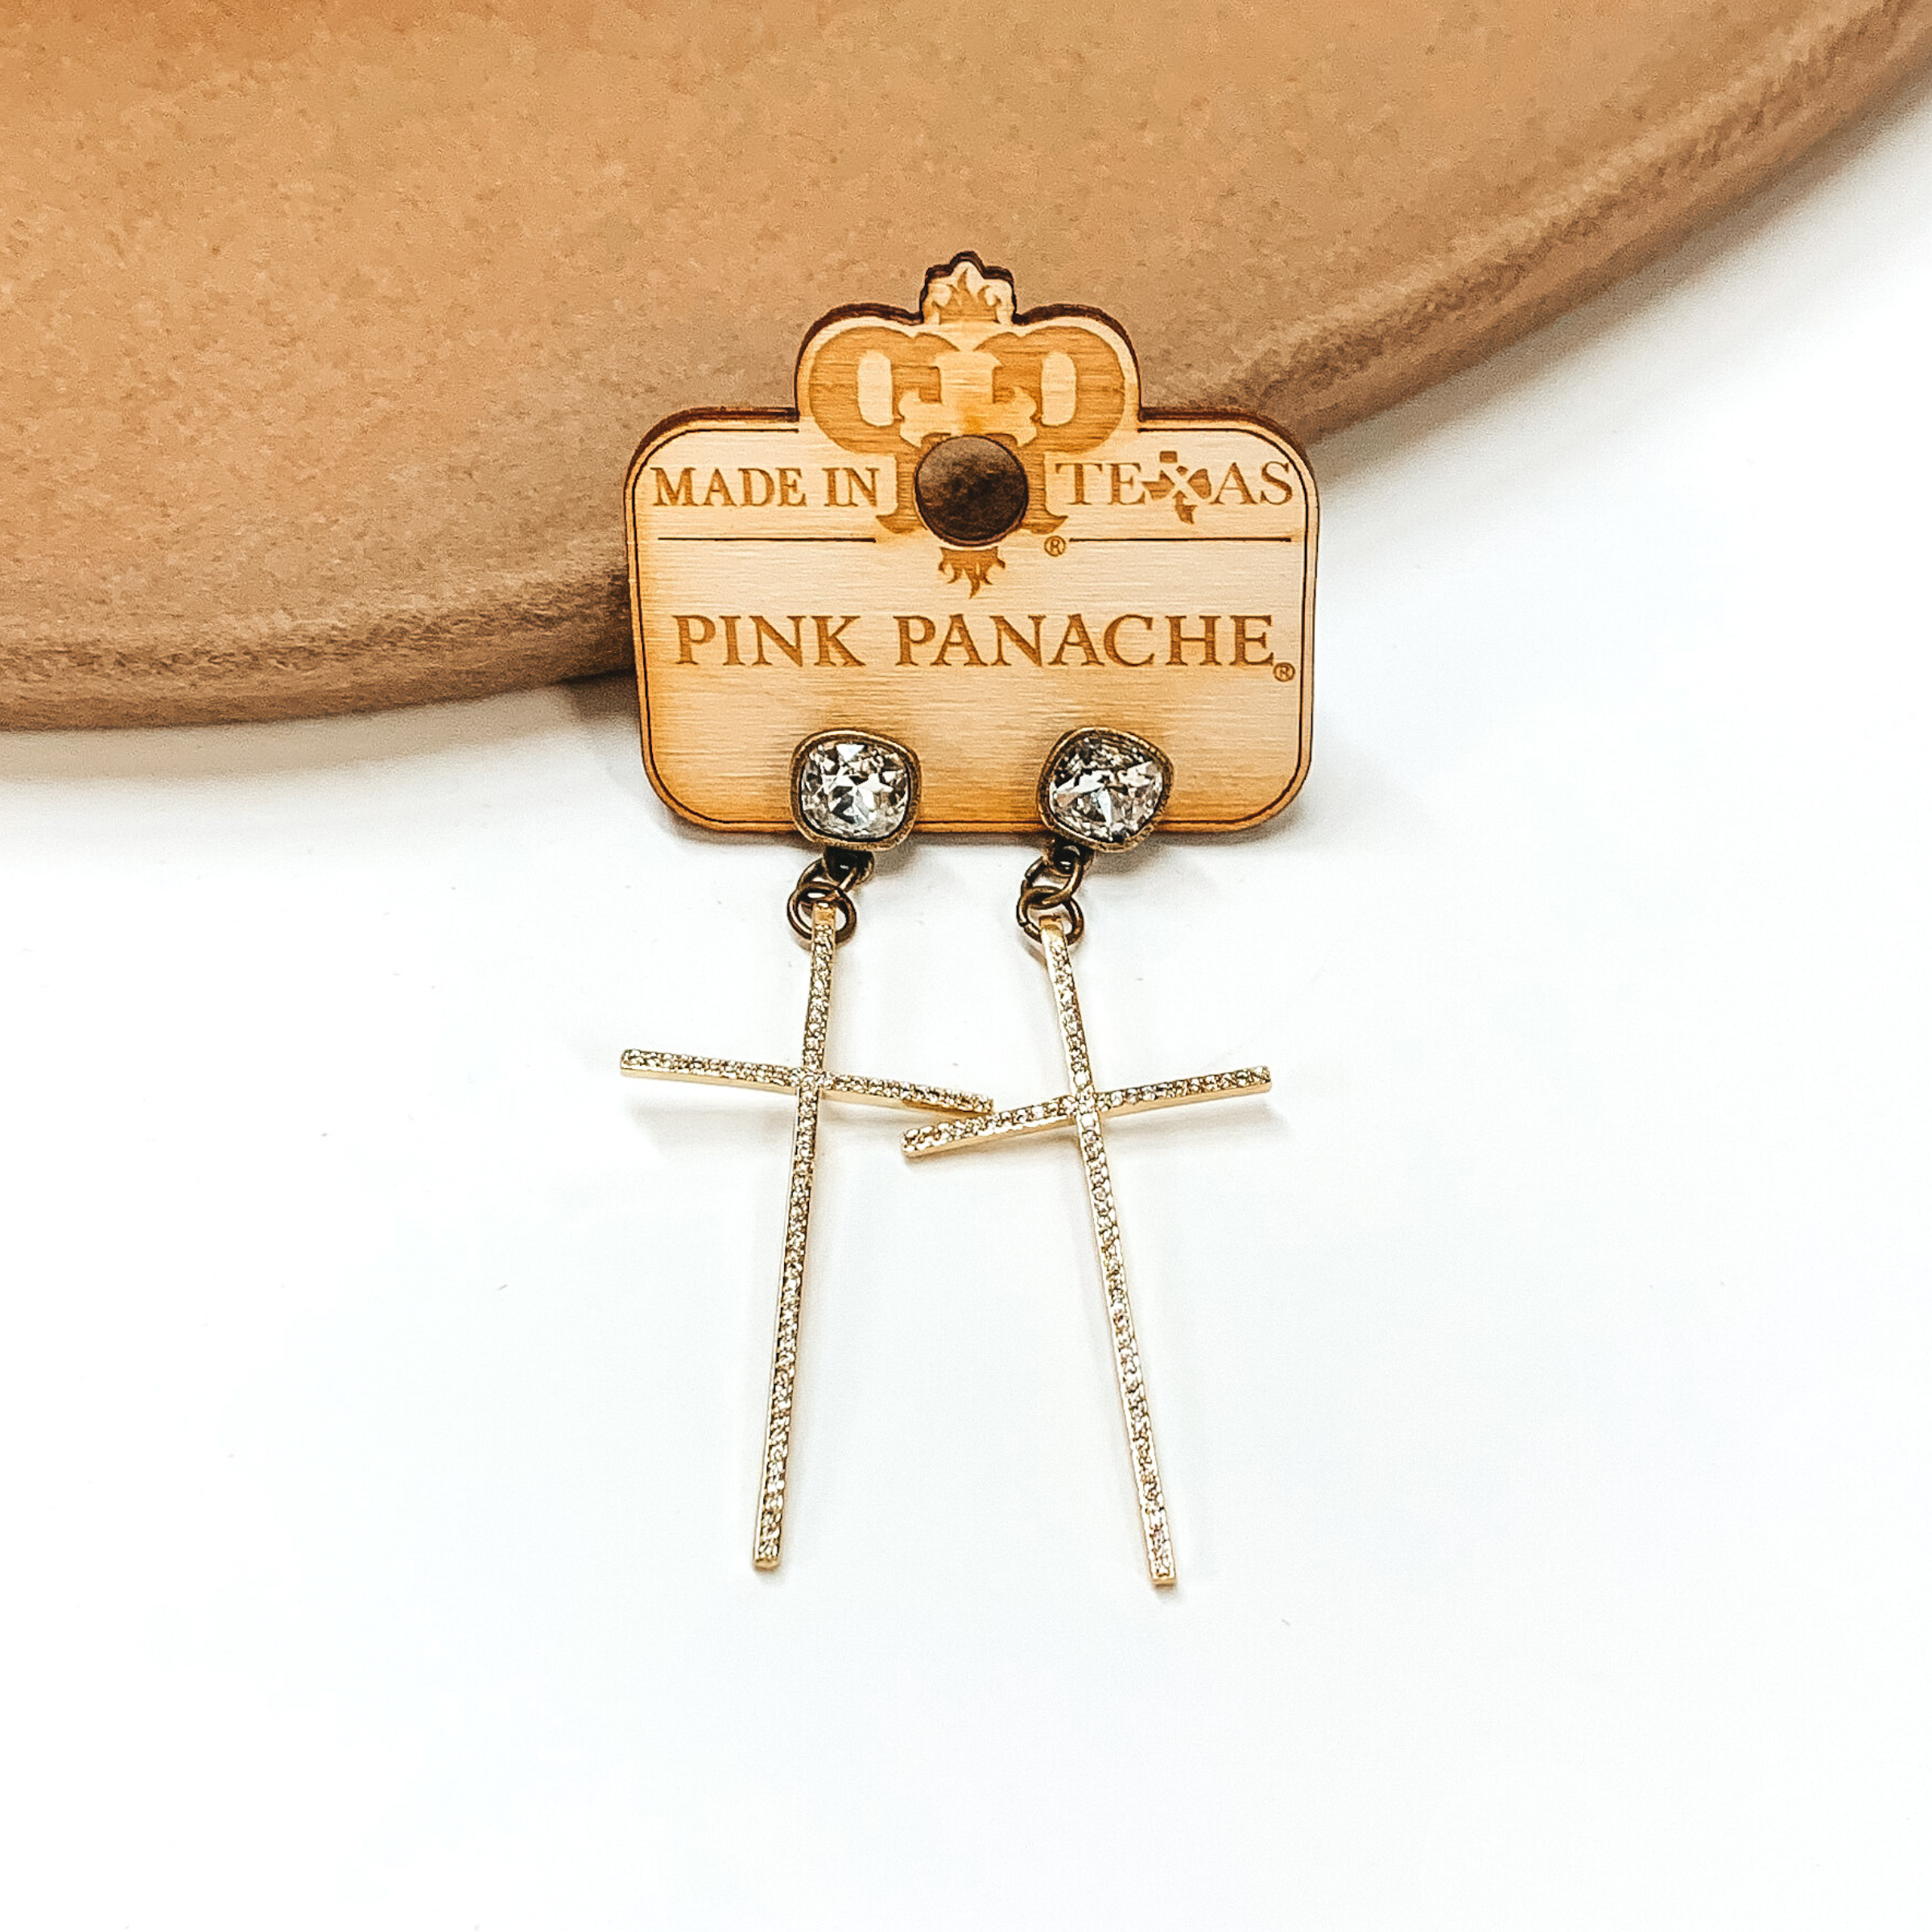 Clear cushion cut crystal studs in a bronze setting with a thin, gold hanging cross. These earrings are pictured on a white and tan background. 